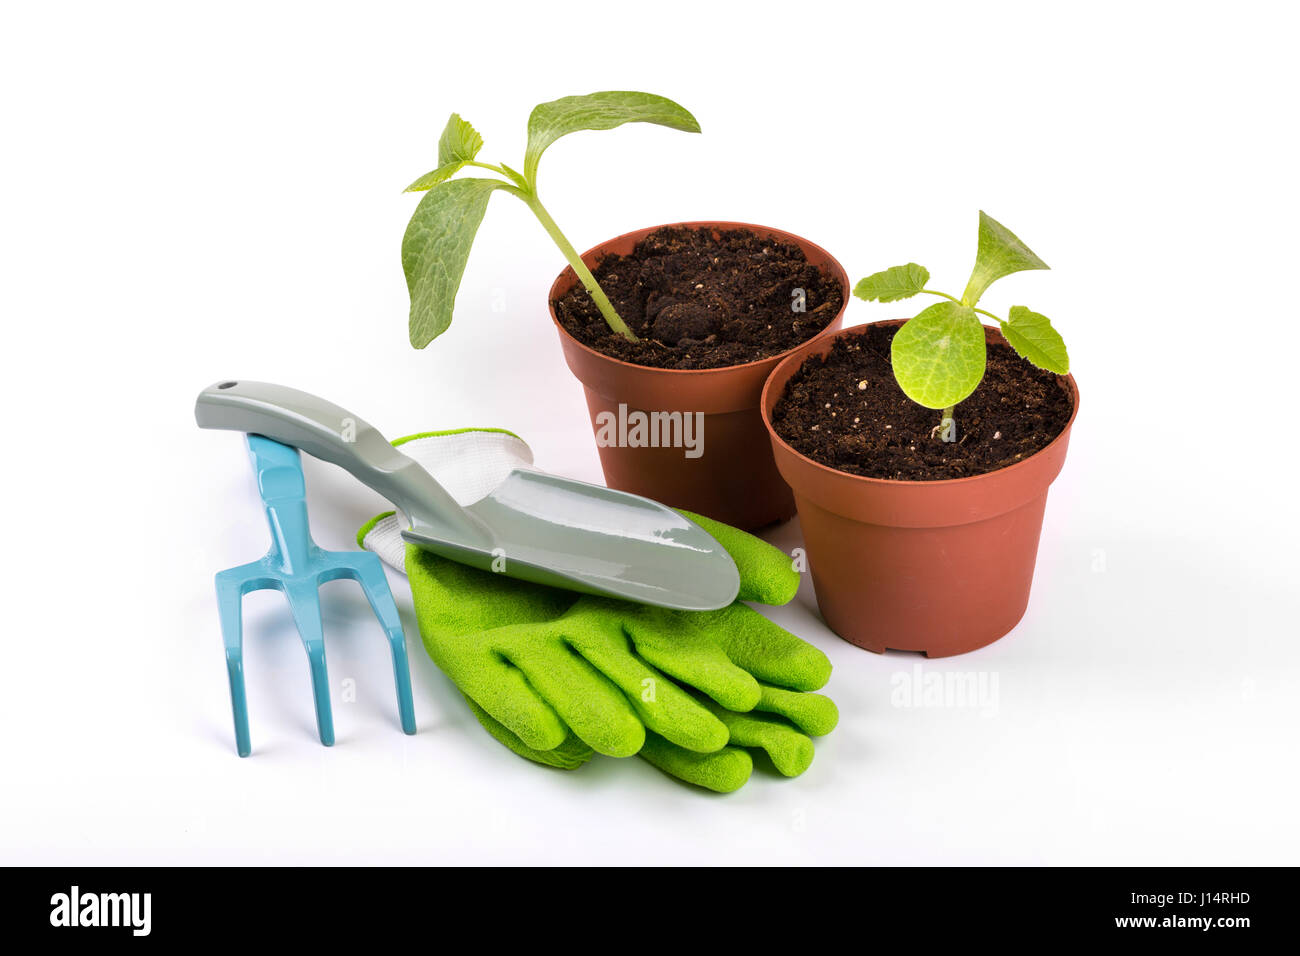 gardening equipment and potted plants isolated on white background Stock Photo